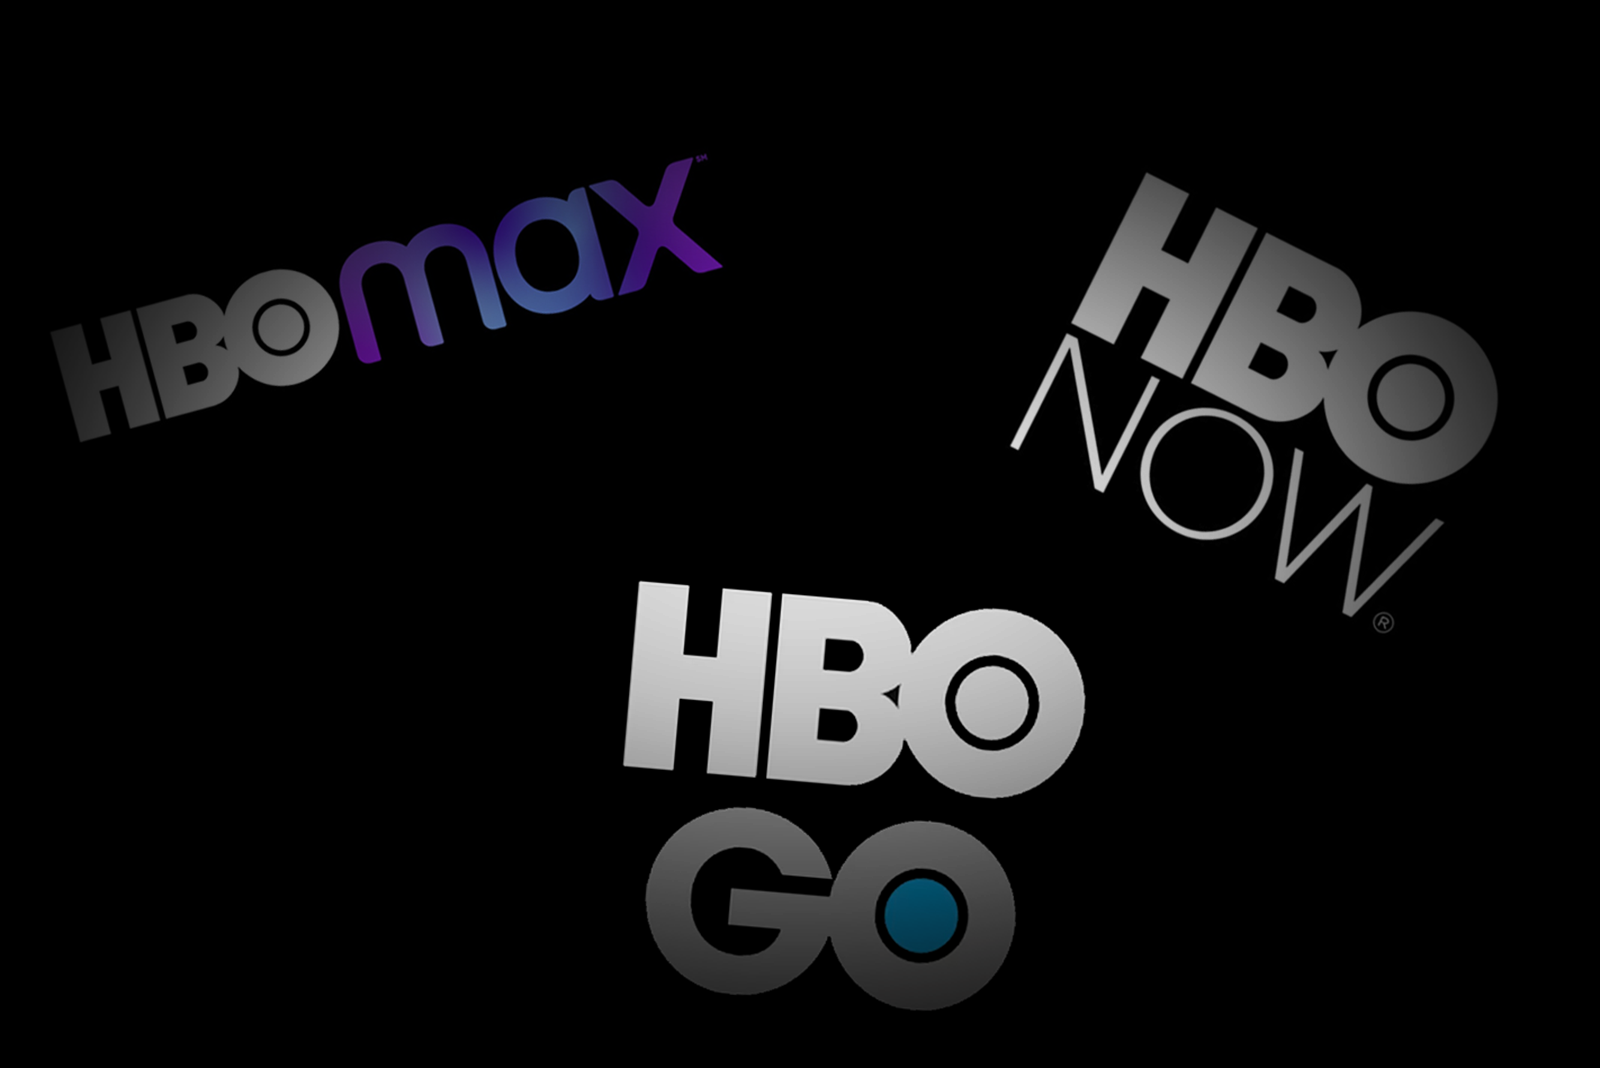 HBO is ditching HBO Go and HBO Now for HBO Max in a really messy way image 1